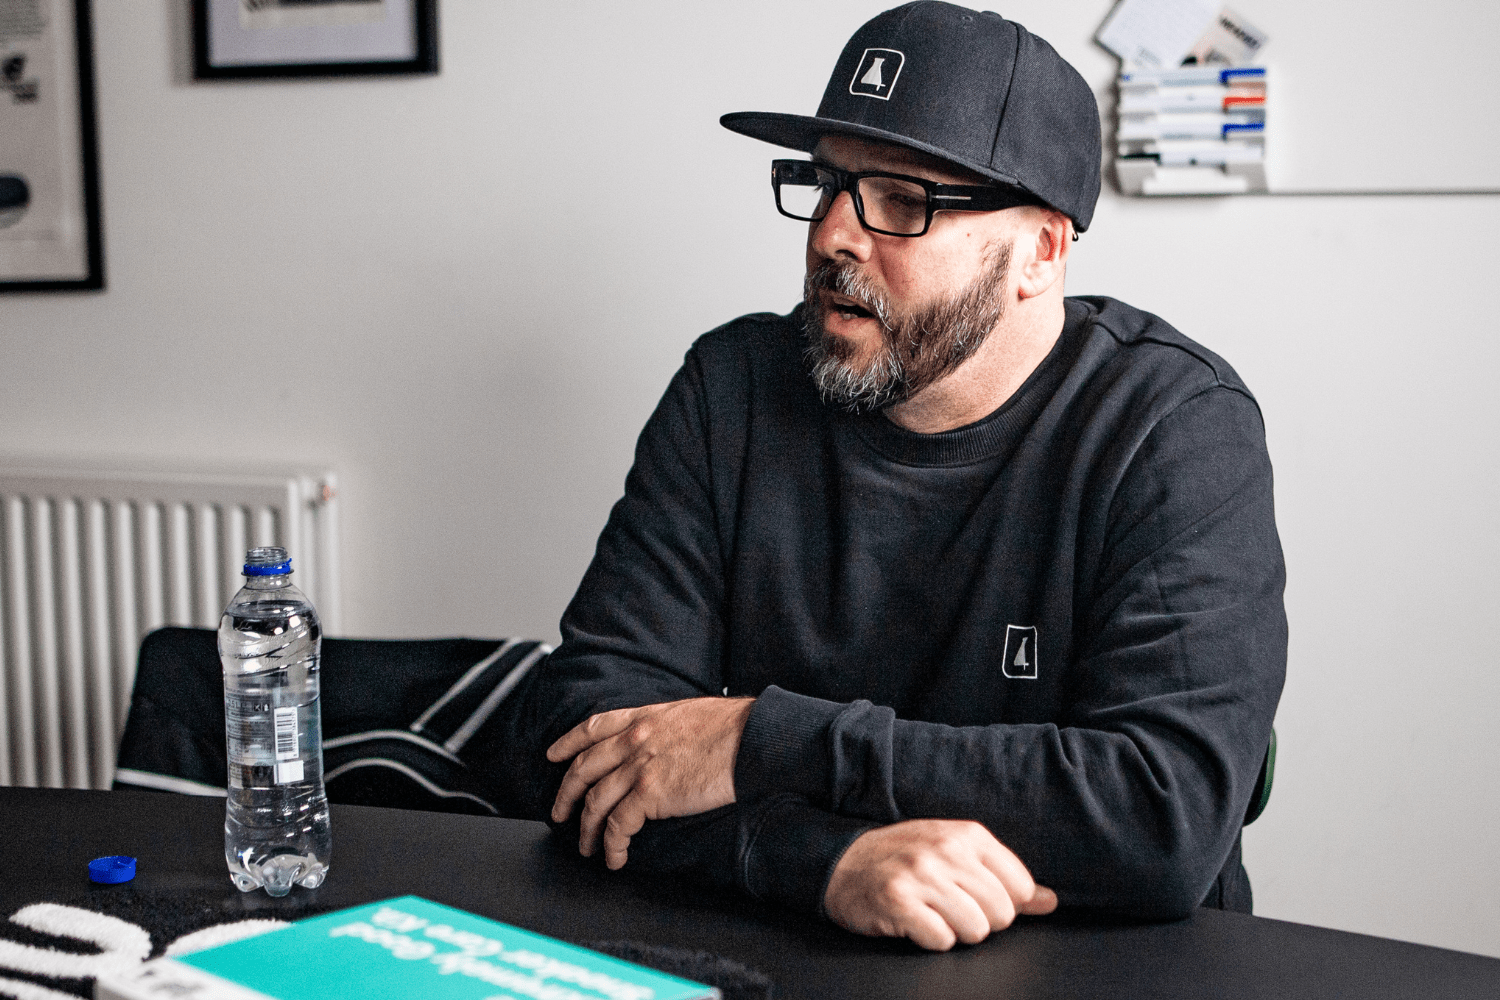 Sneaker LAB founder Jo Farah on teaching us to take care of what we love - Sneakerjagers interview